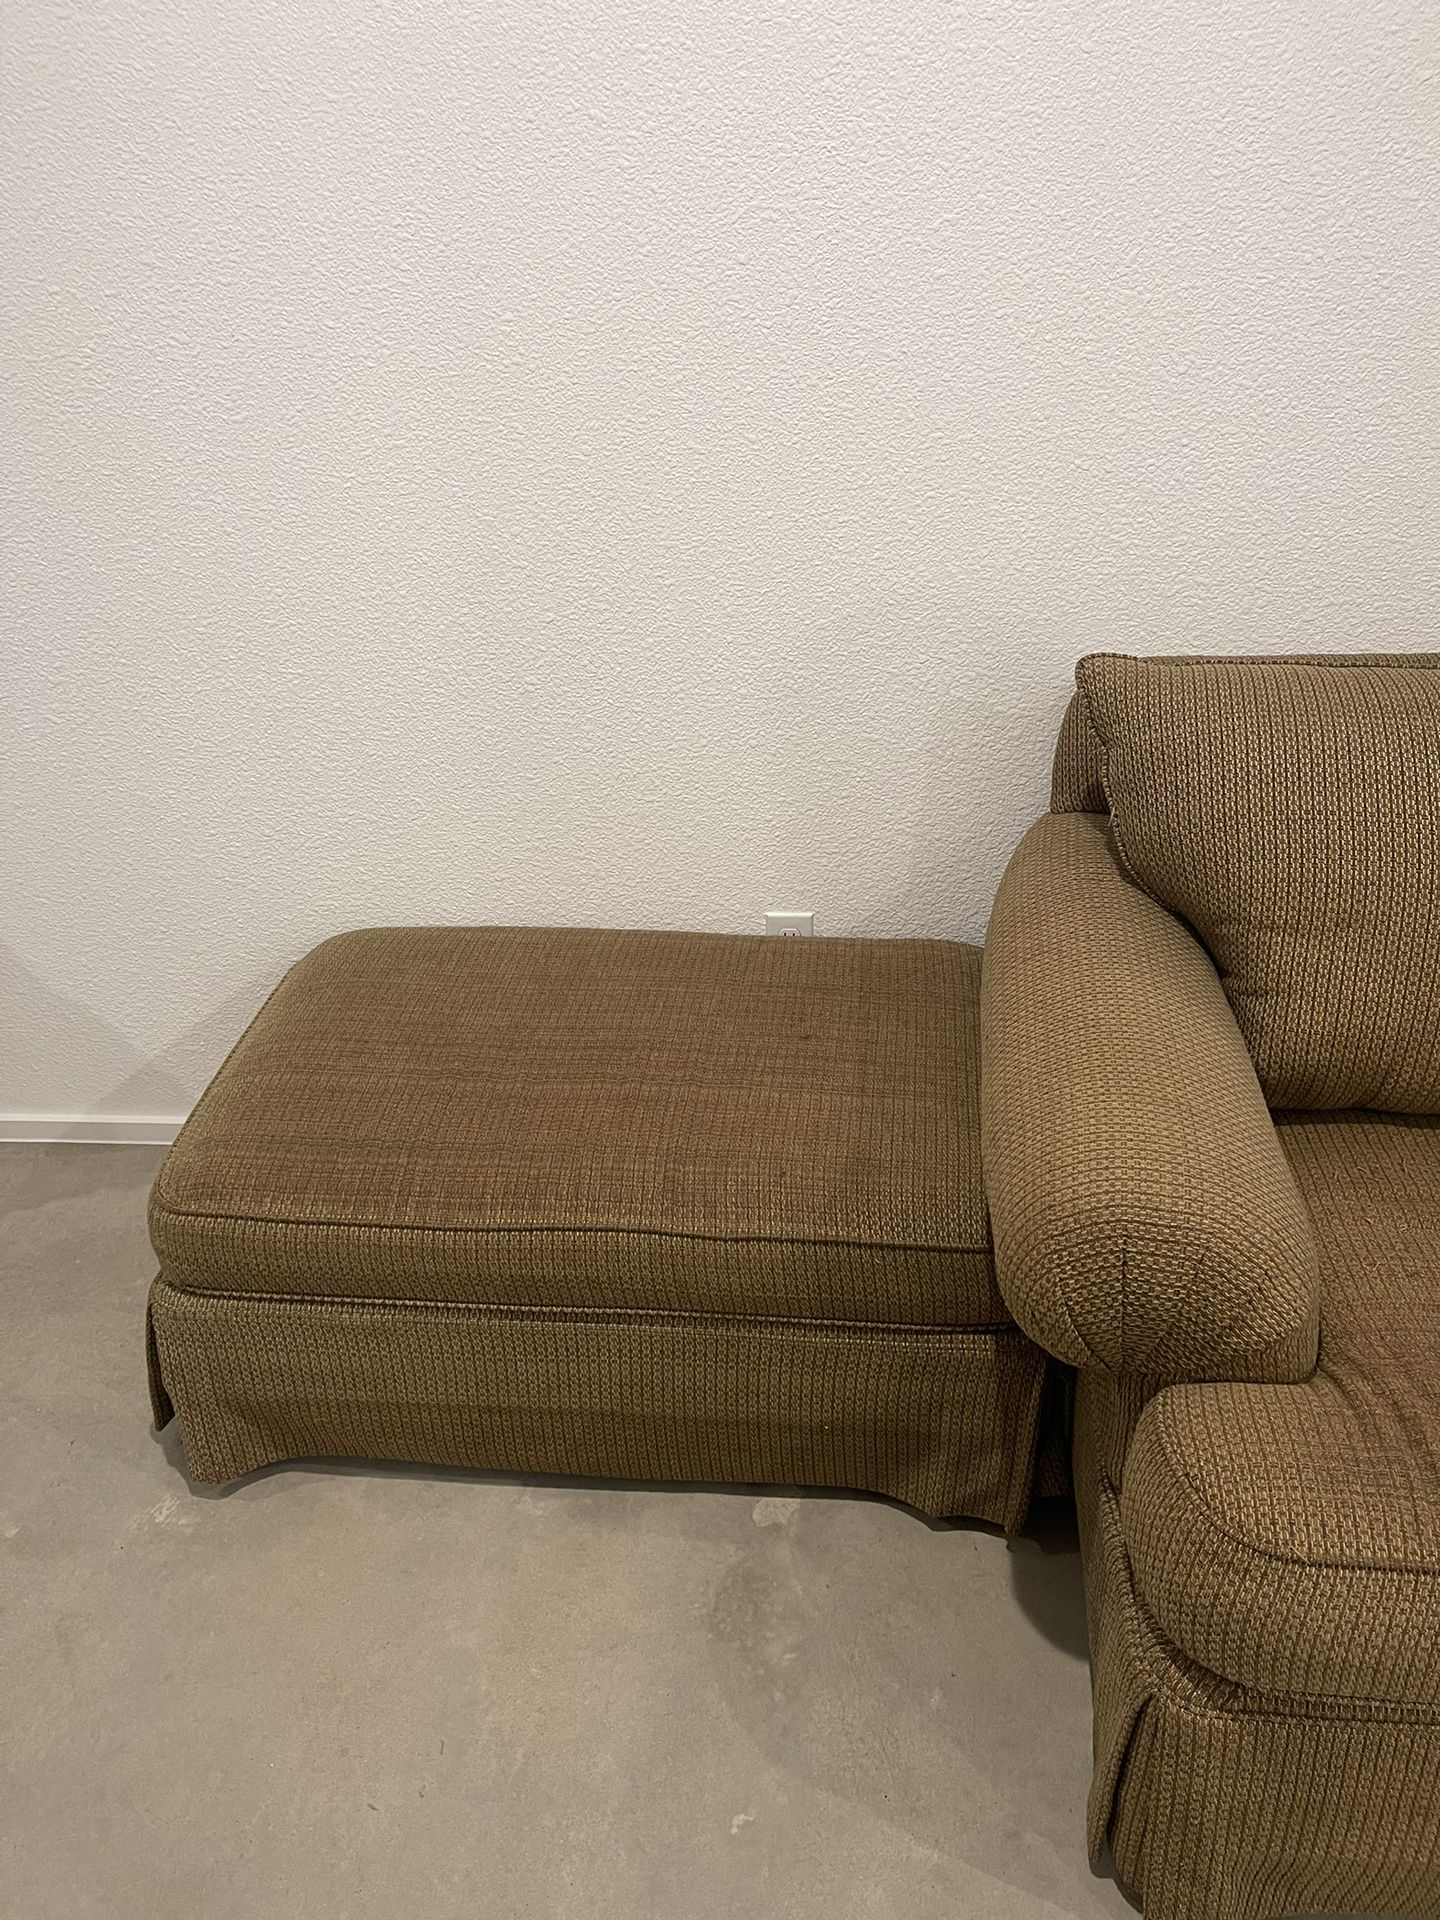 Barely Used Chair 